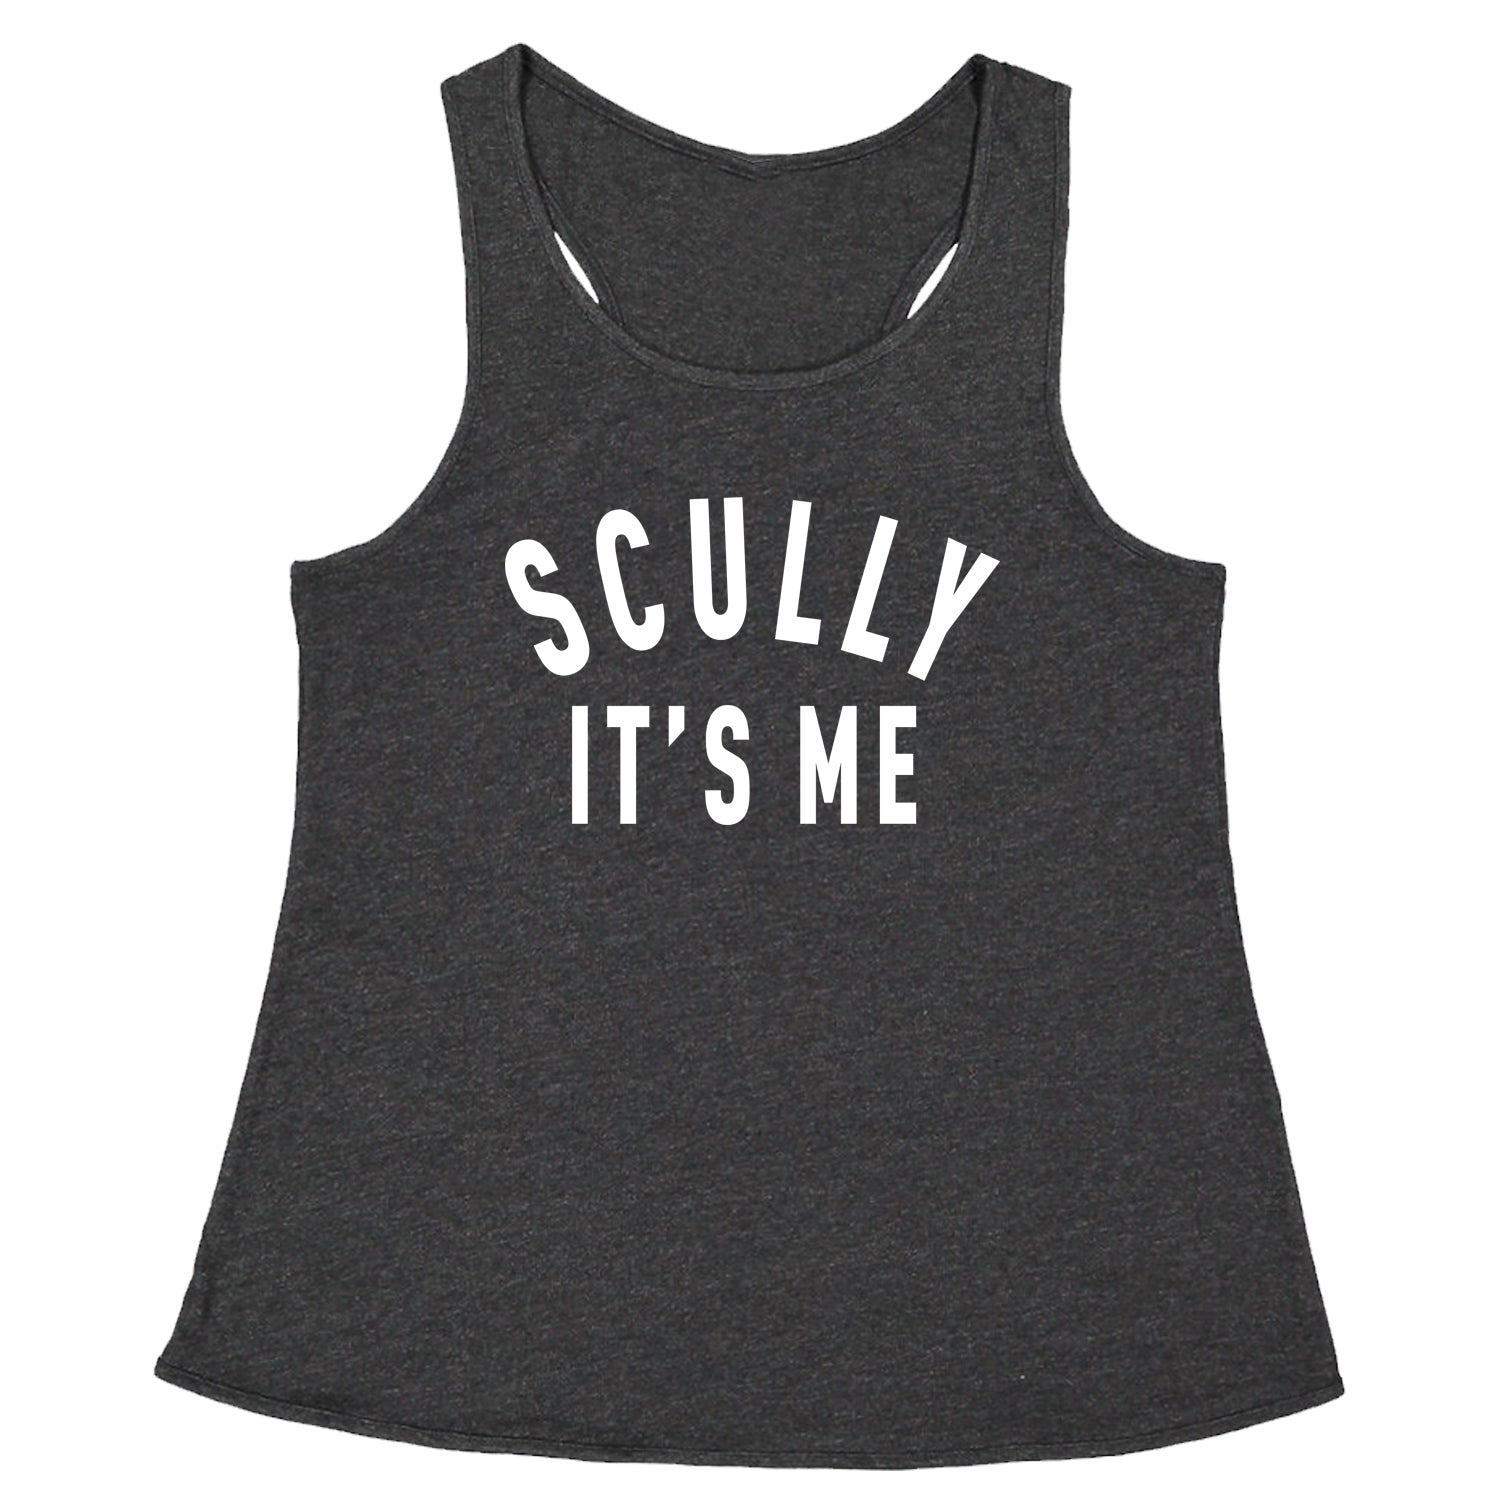 Scully, It's Me Racerback Tank Top for Women #expressiontees by Expression Tees